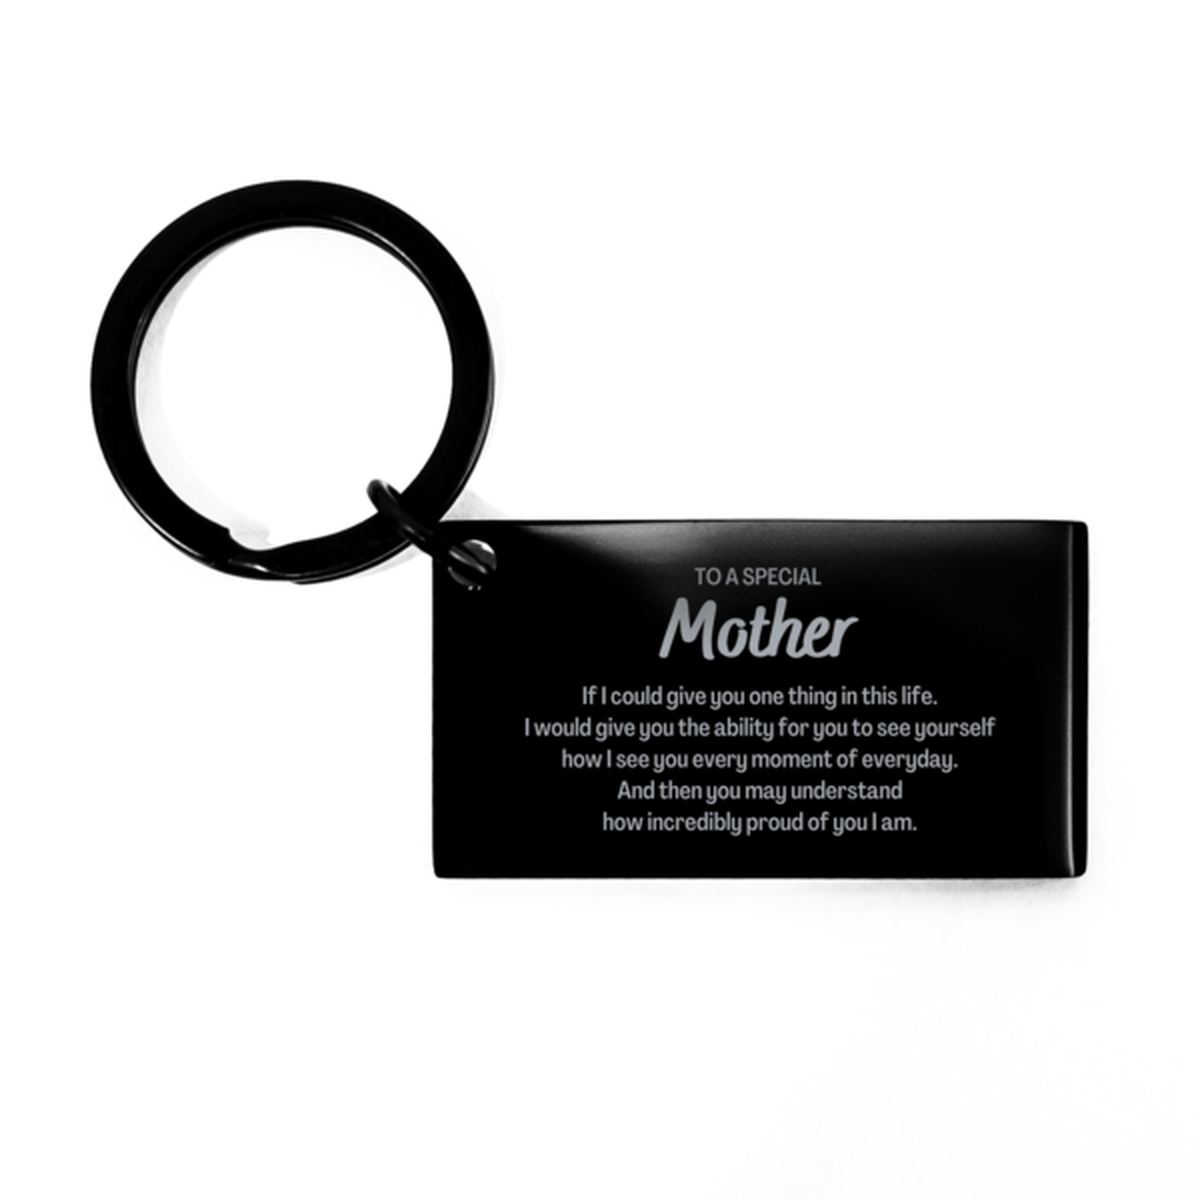 To My Mother Keychain, Gifts For Mother Engraved, Inspirational Gifts for Christmas Birthday, Epic Gifts for Mother To A Special Mother how incredibly proud of you I am